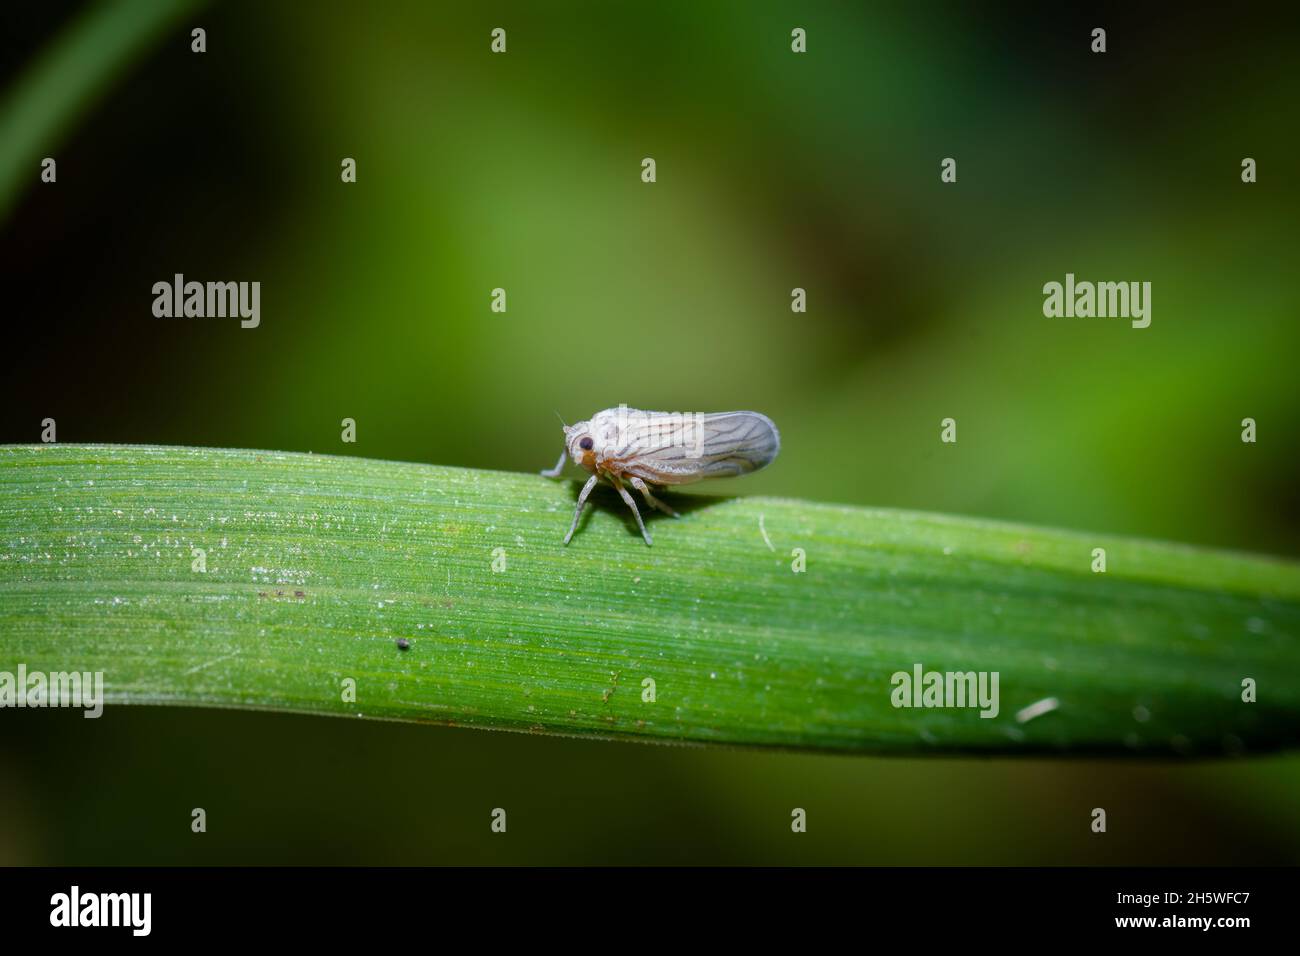 White backed plant hopper on the leaf of plant. This is the insect pest of rice crop. Used selective focus. Stock Photo